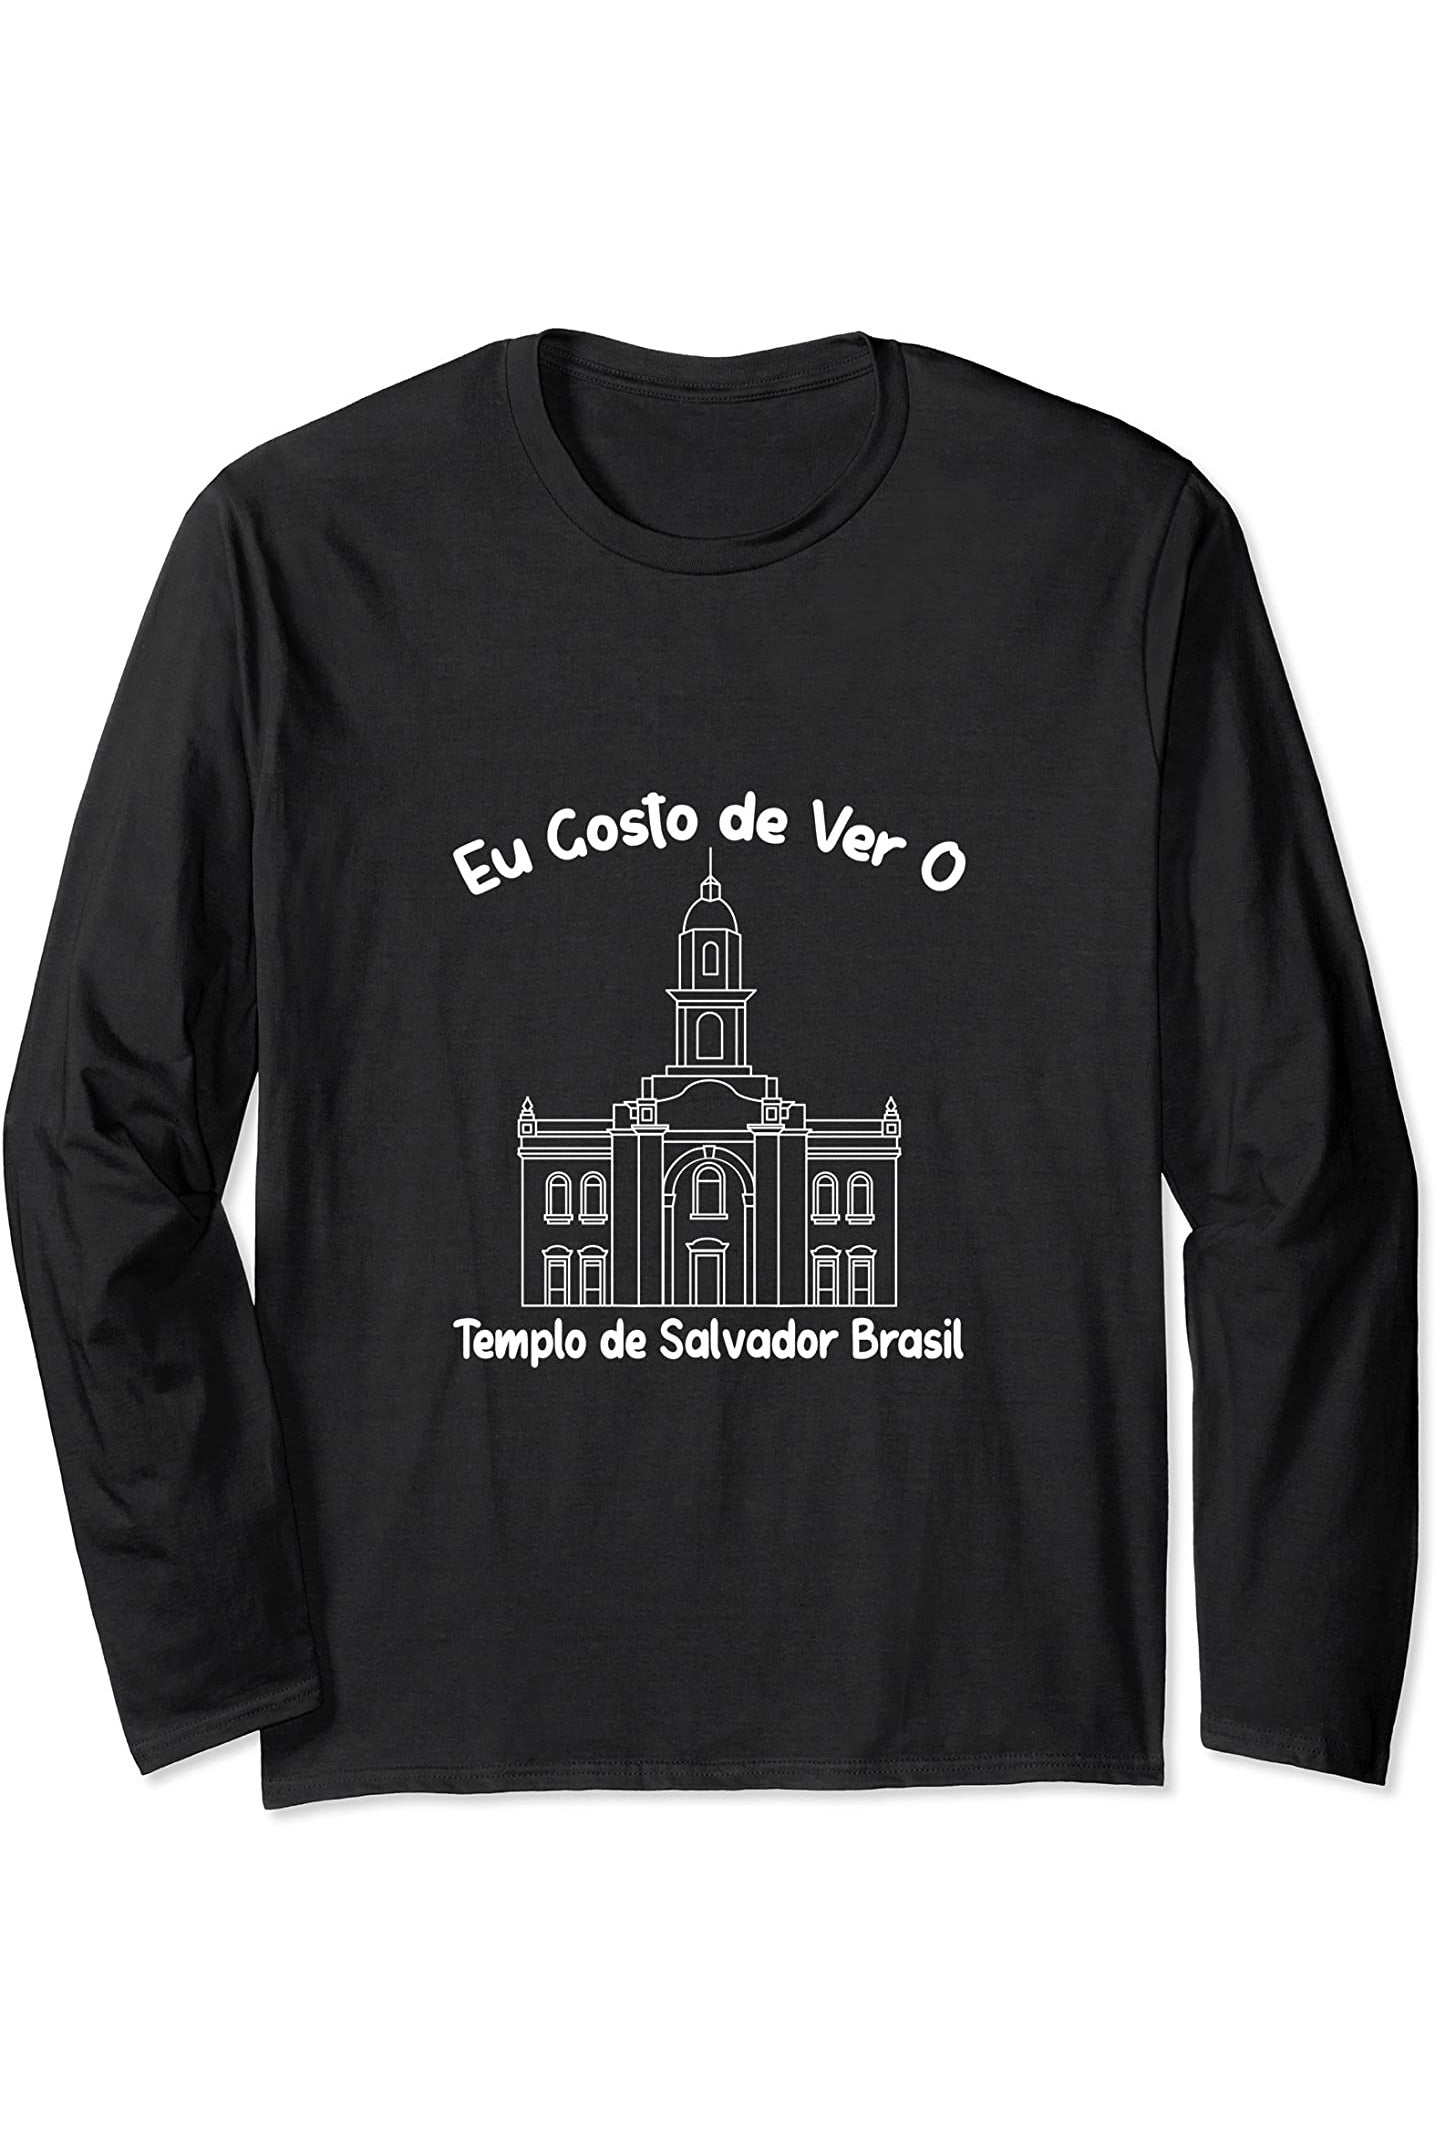 Salvador Brazil Temple Long Sleeve T-Shirt - Primary Style (Portuguese) US